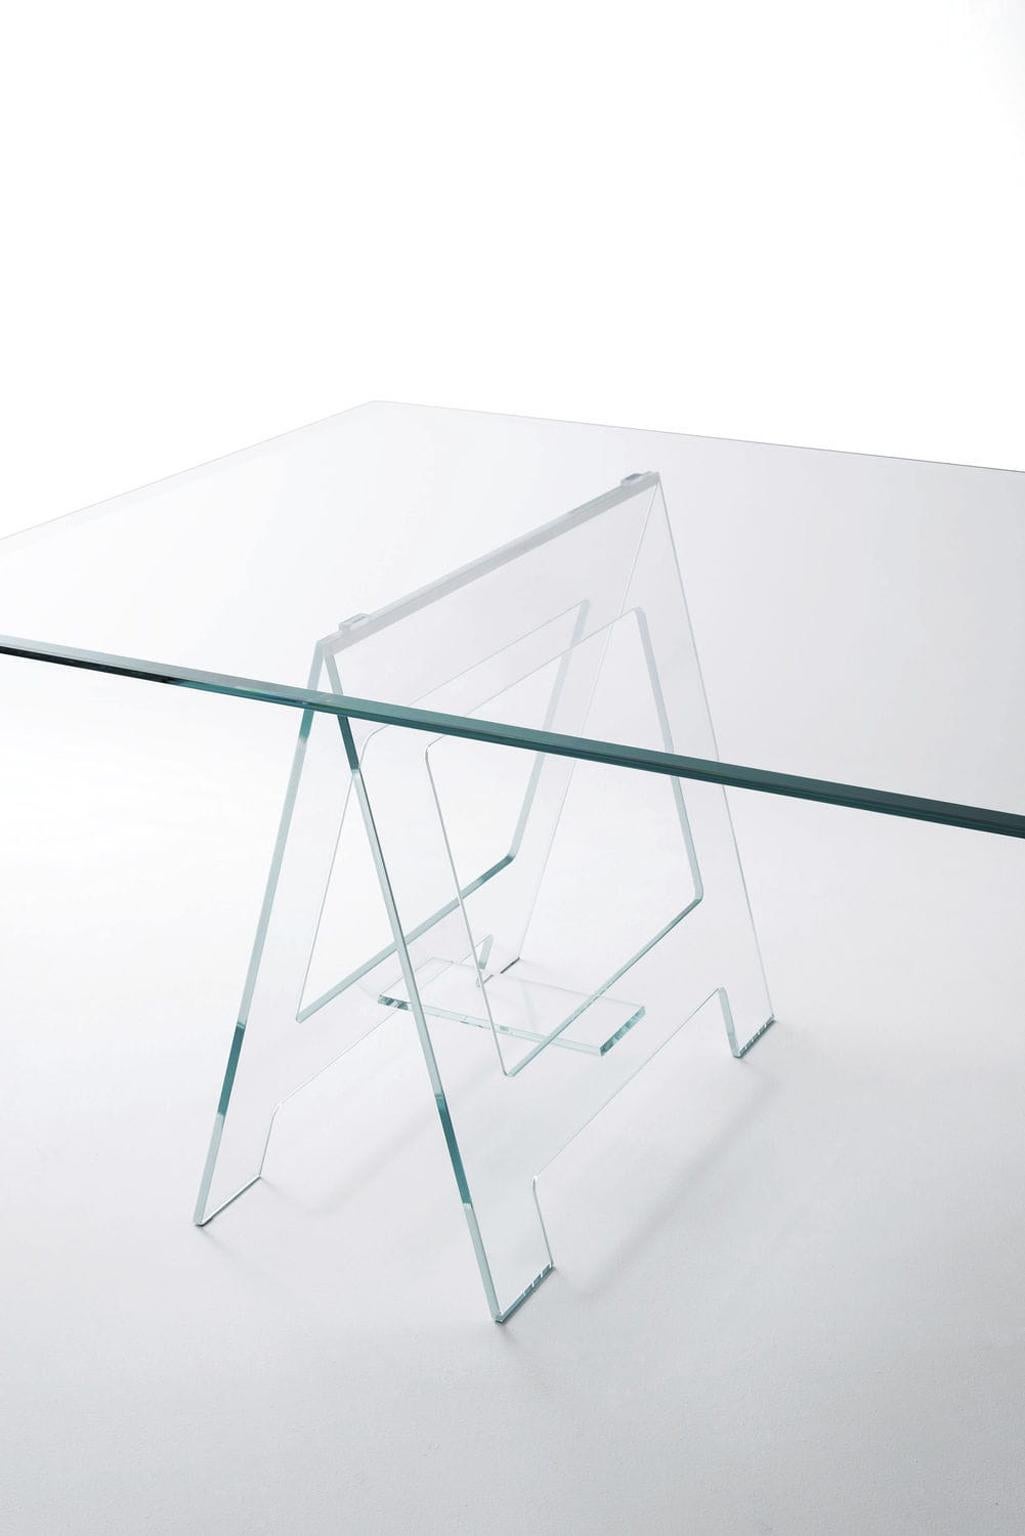 Contemporary 21st Century Italian Modern Design Desk or Dining Table with Easels